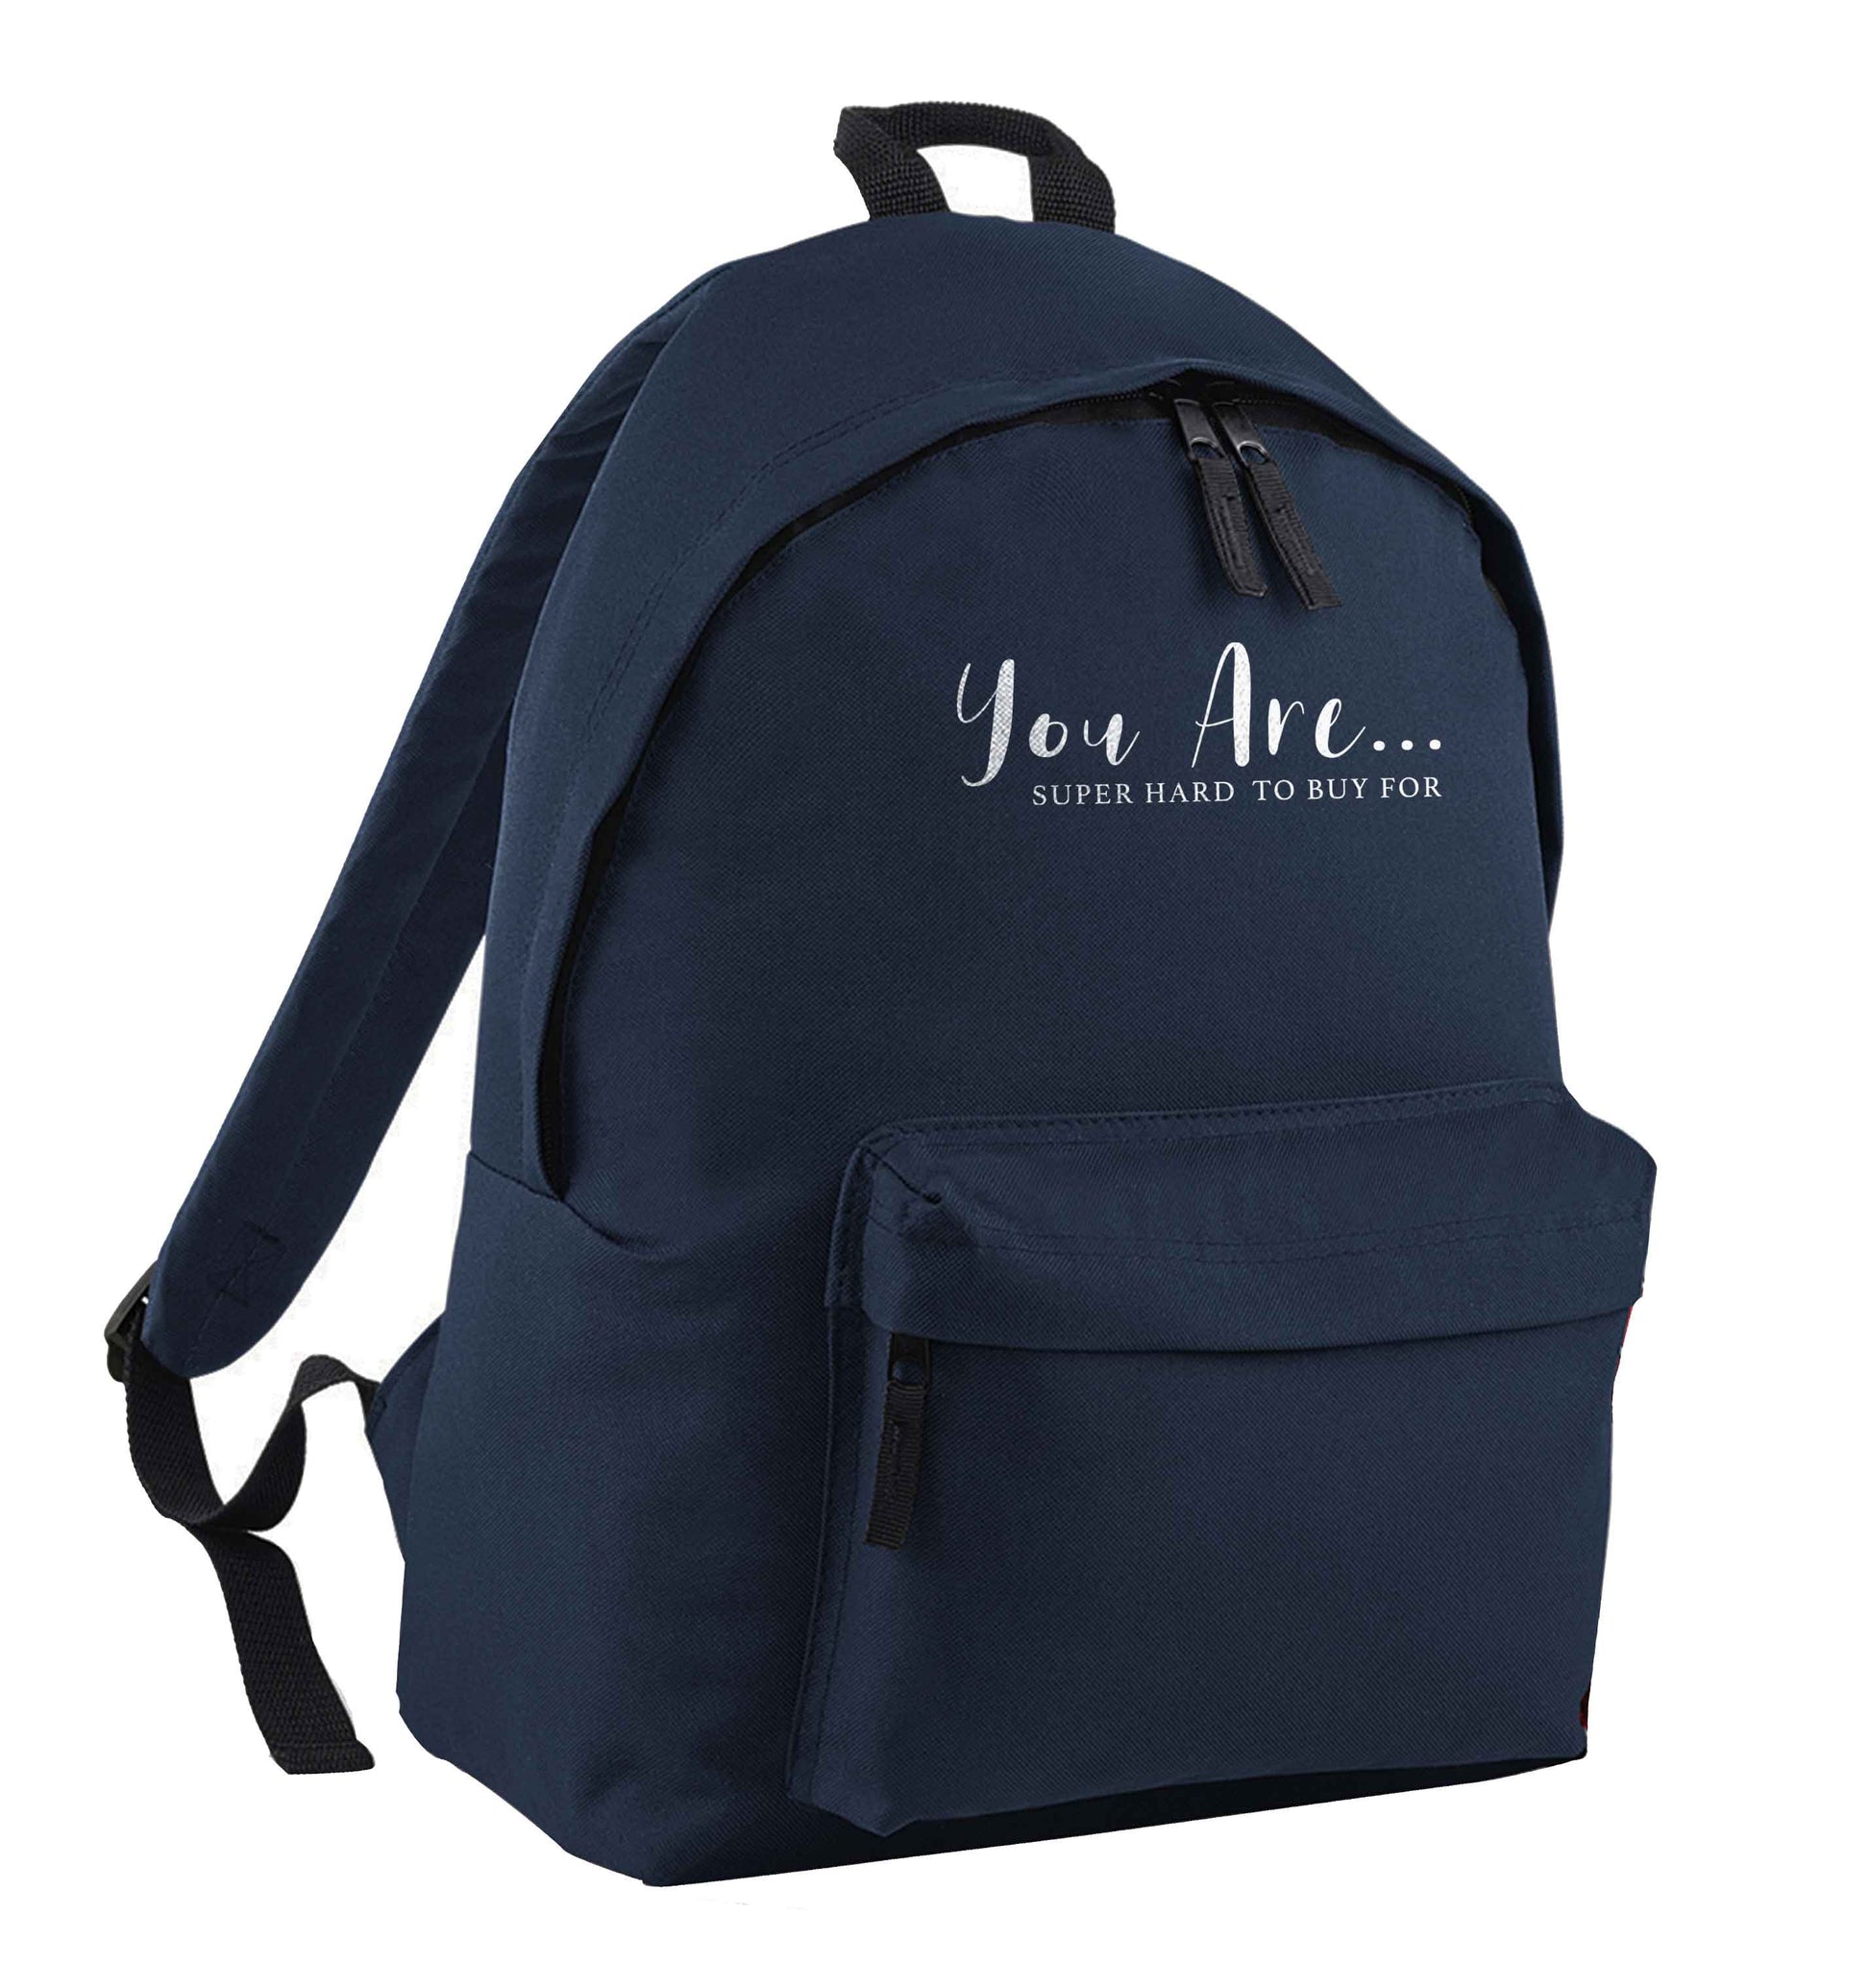 You are super hard to buy for navy adults backpack